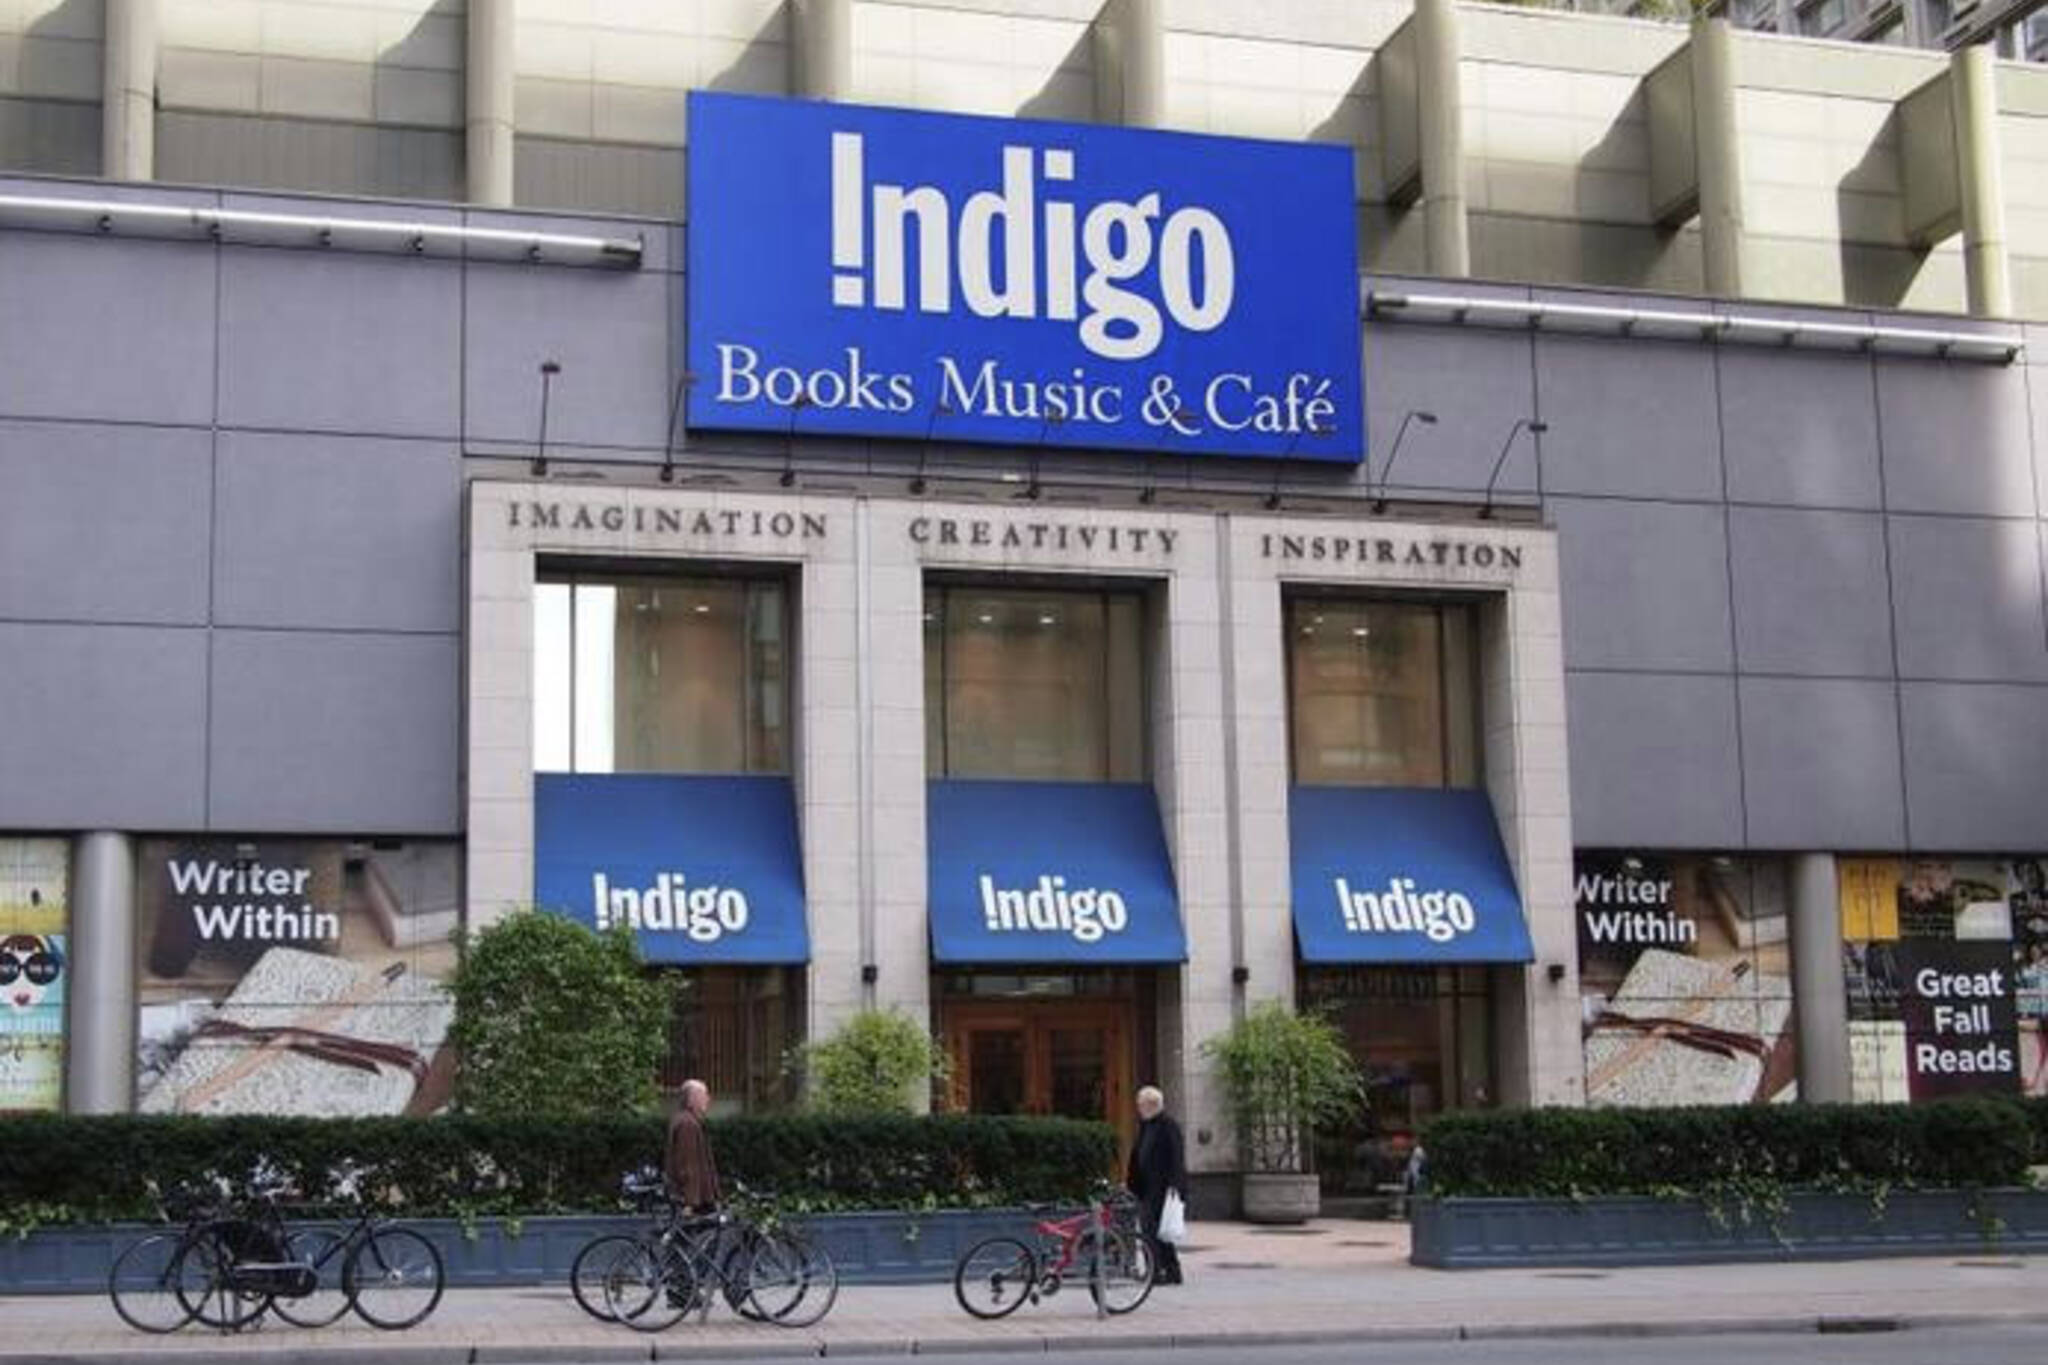 Debate rages in Toronto after dogs allowed in Indigo stores